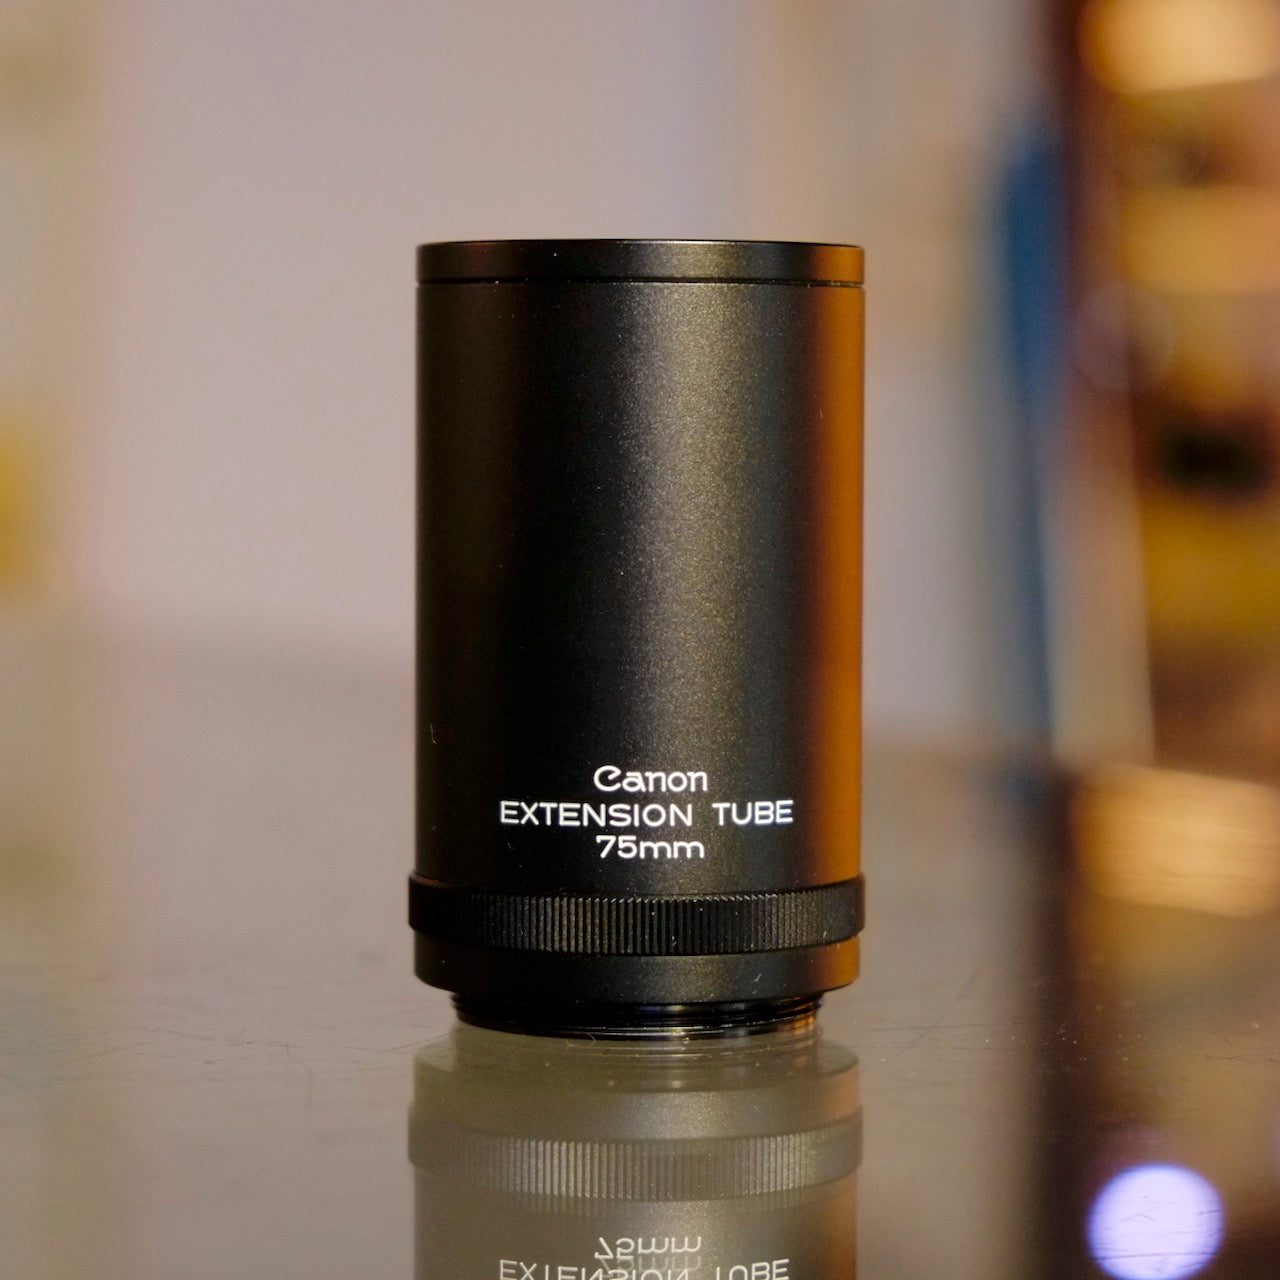 Canon 75mm extension tube